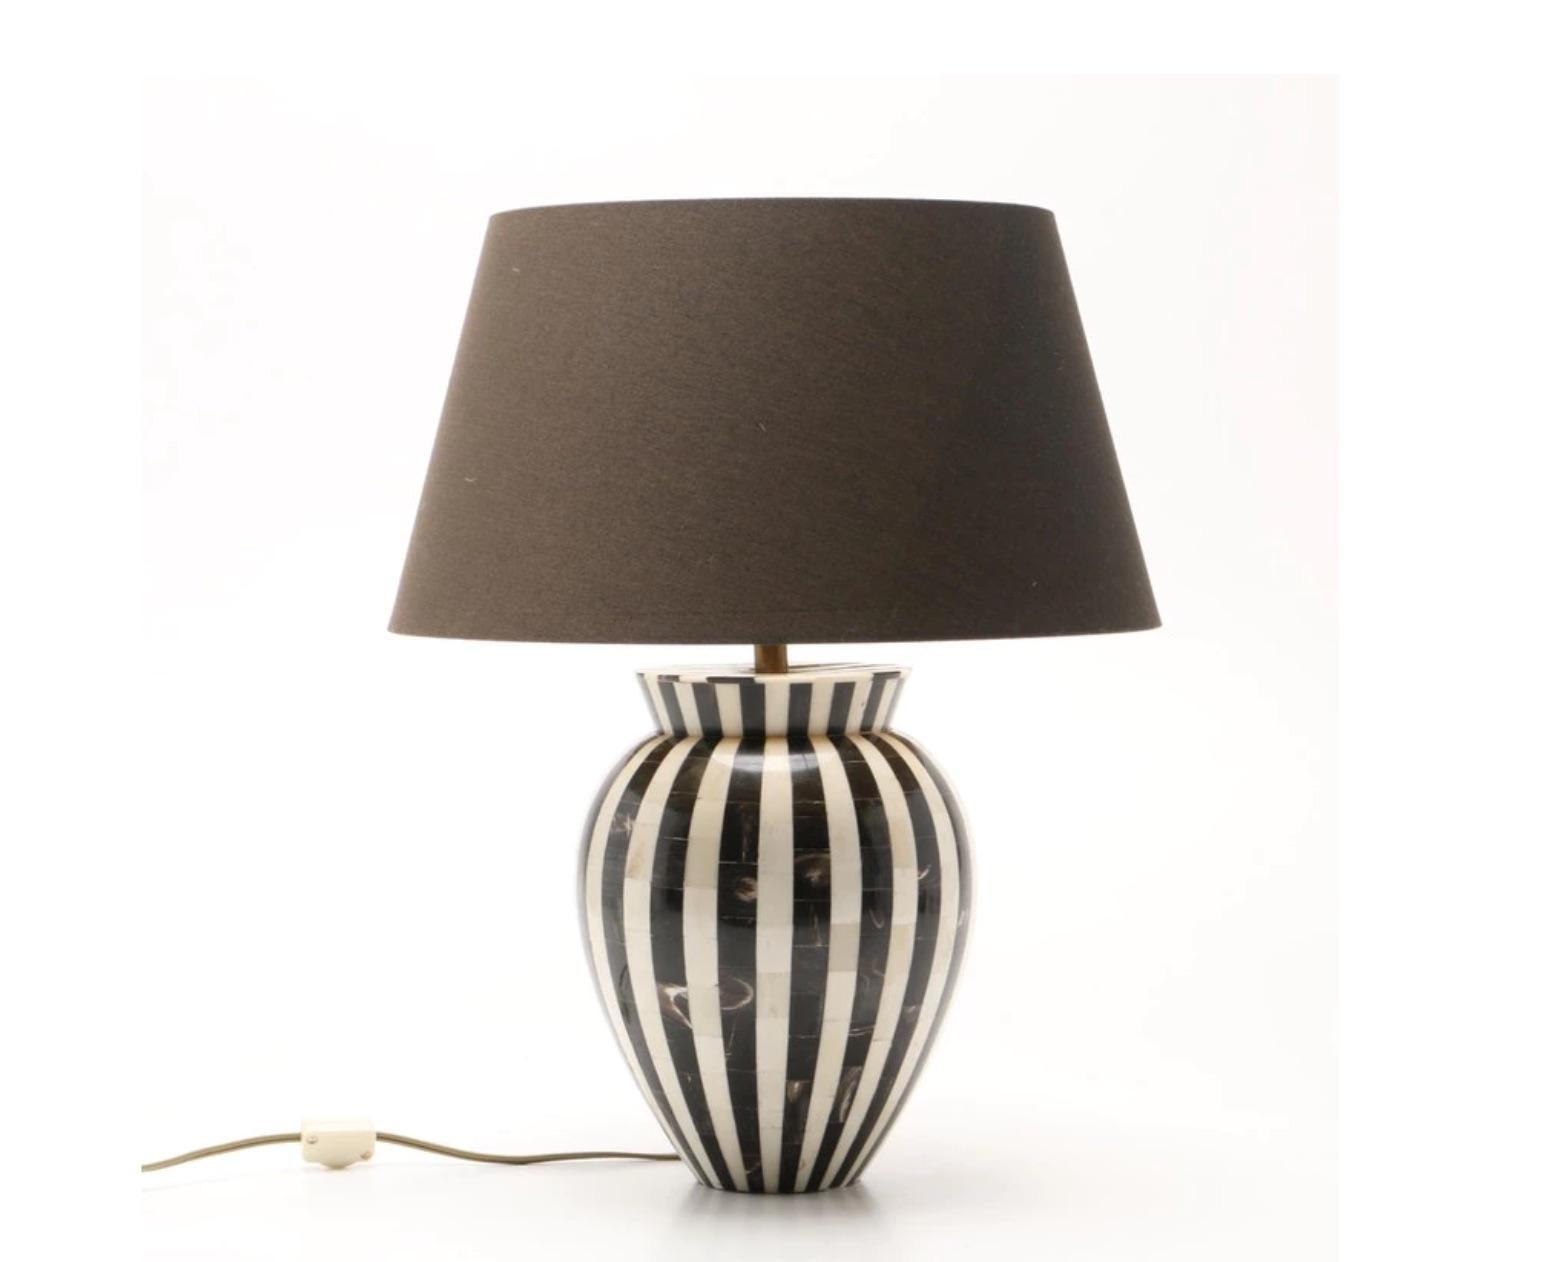 An amazingly stunning one-of-a-kind Mid-Century Modern, most likely French, pair of table lamps-variegated black horn and beige striped camel bone inlay in a vertical stripe pattern, each having a linen shade. The single bronze tone socket lamps